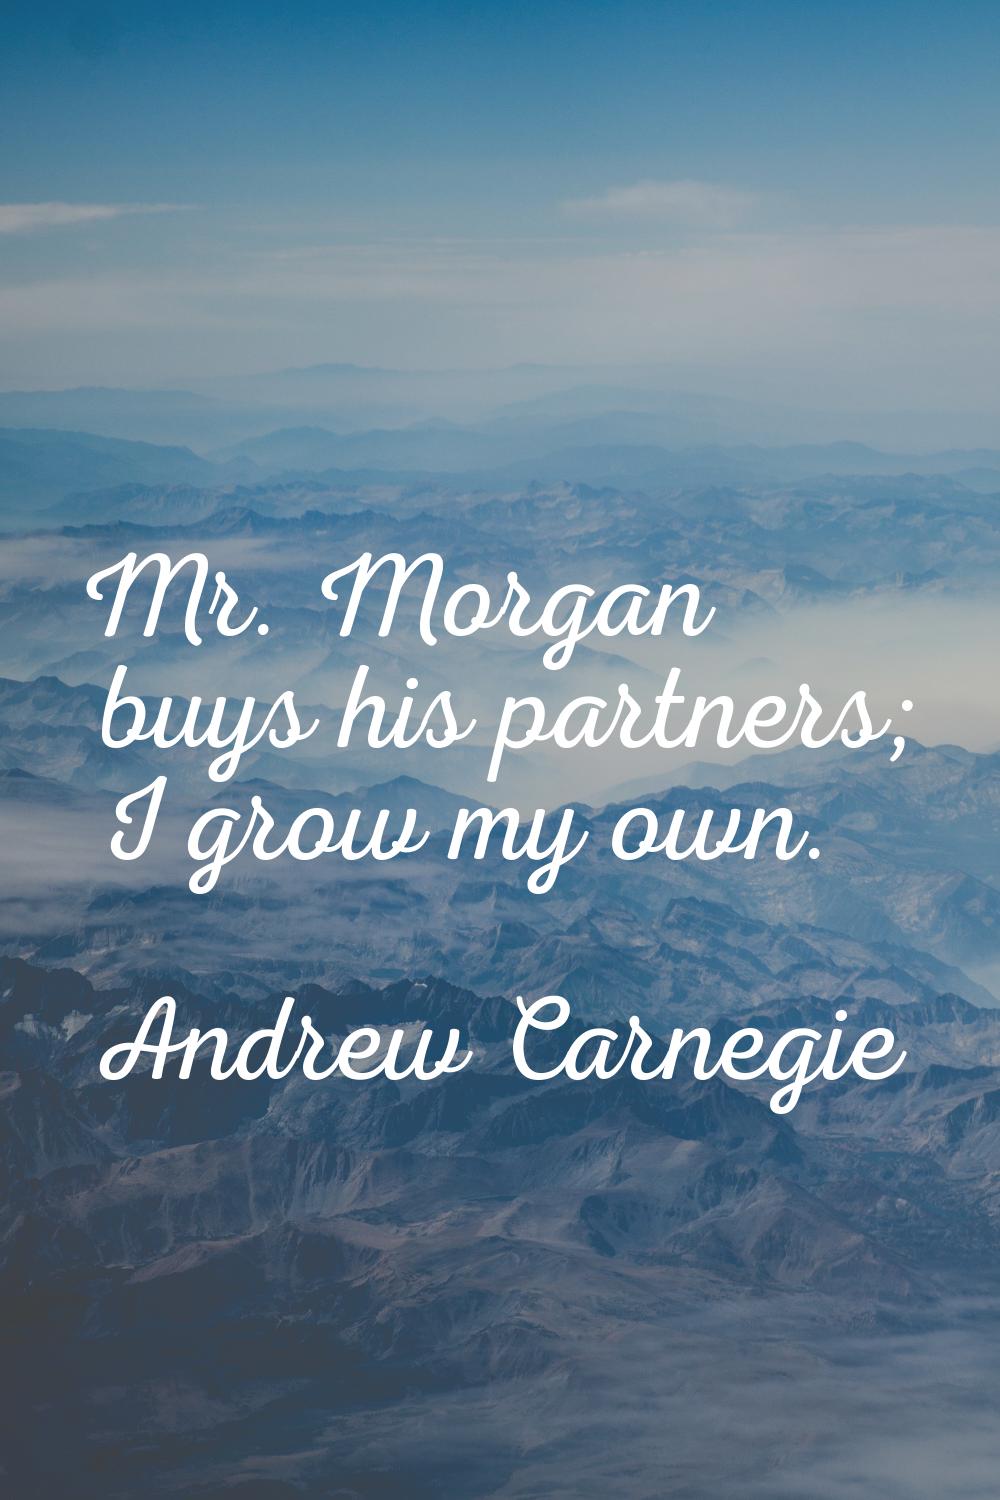 Mr. Morgan buys his partners; I grow my own.